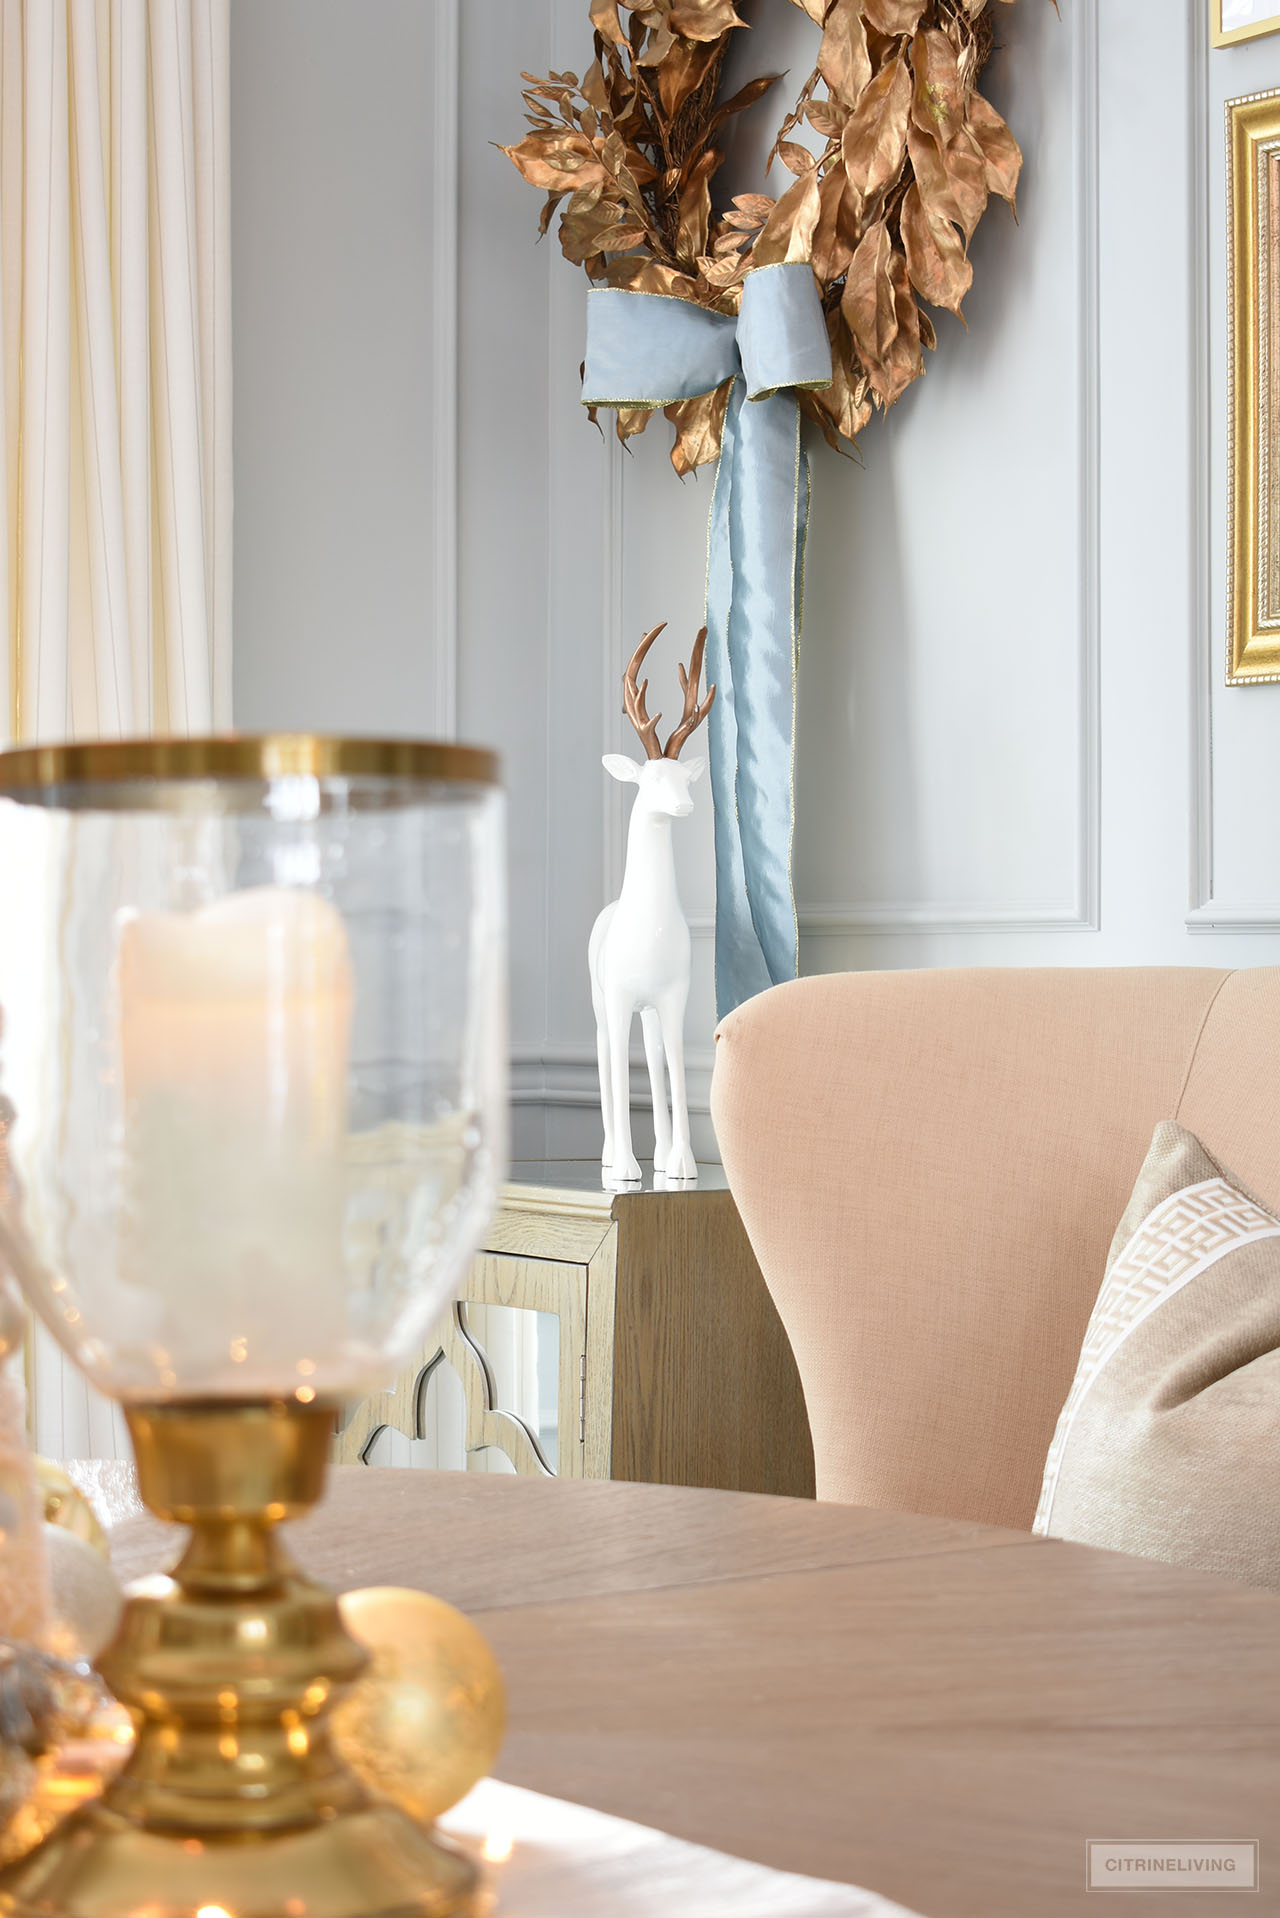 Dining room decor with a gold wreath hanging above a mirrored cabinet styled with a simple white and gold reindeer.